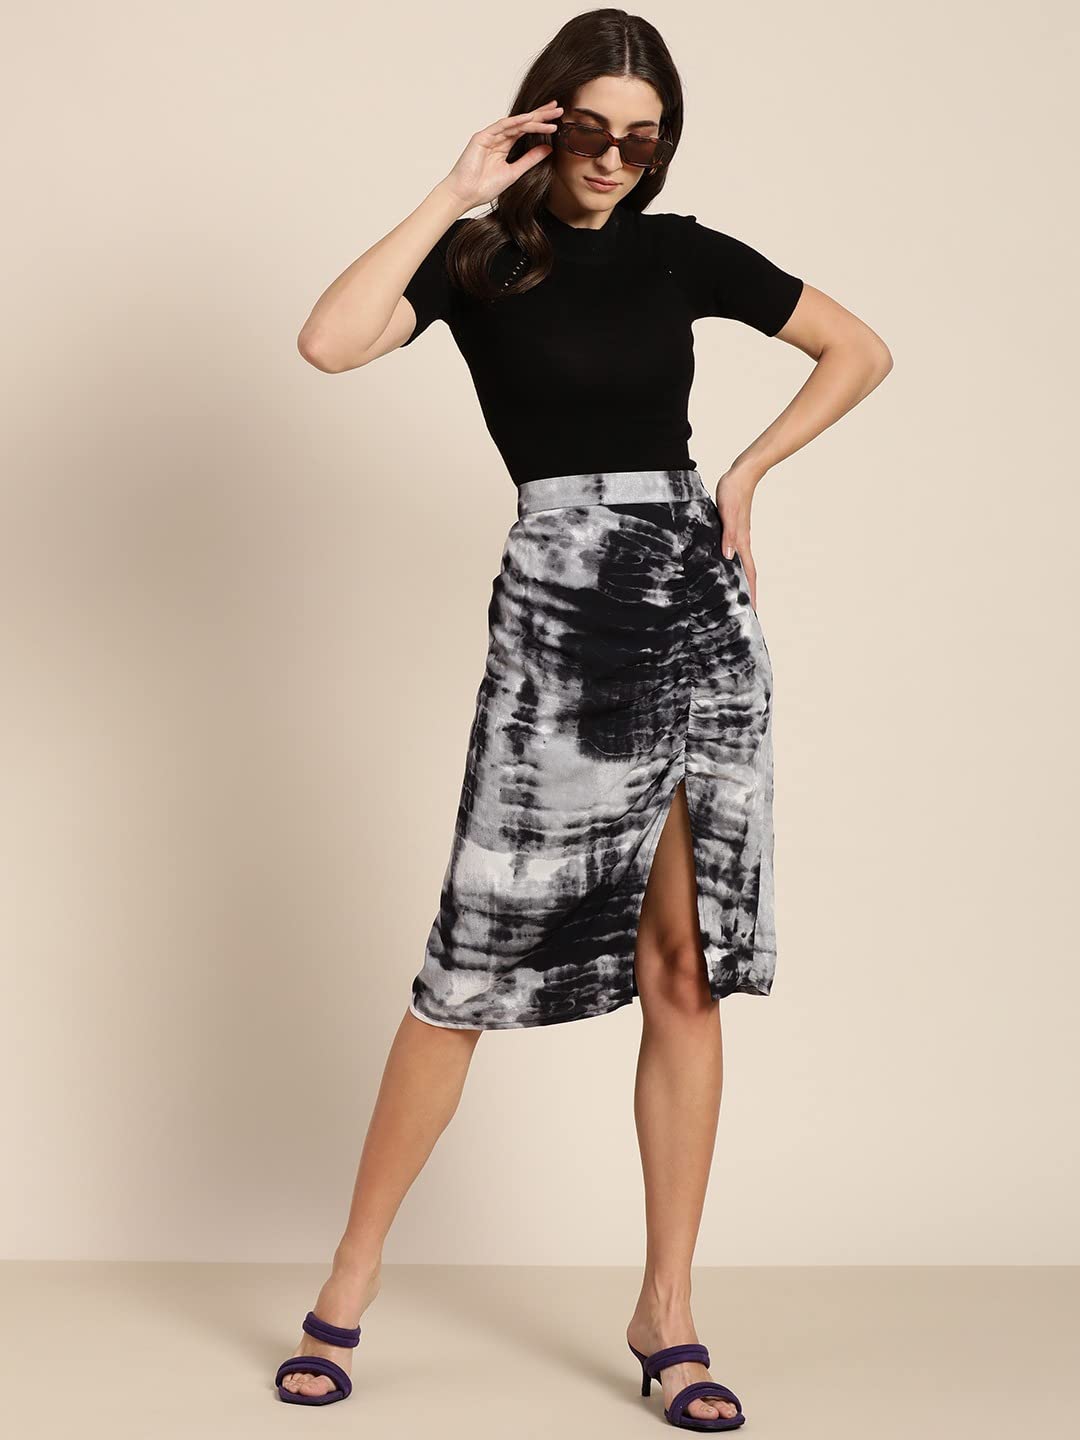 Marie Claire Crepe Western Skirt Black